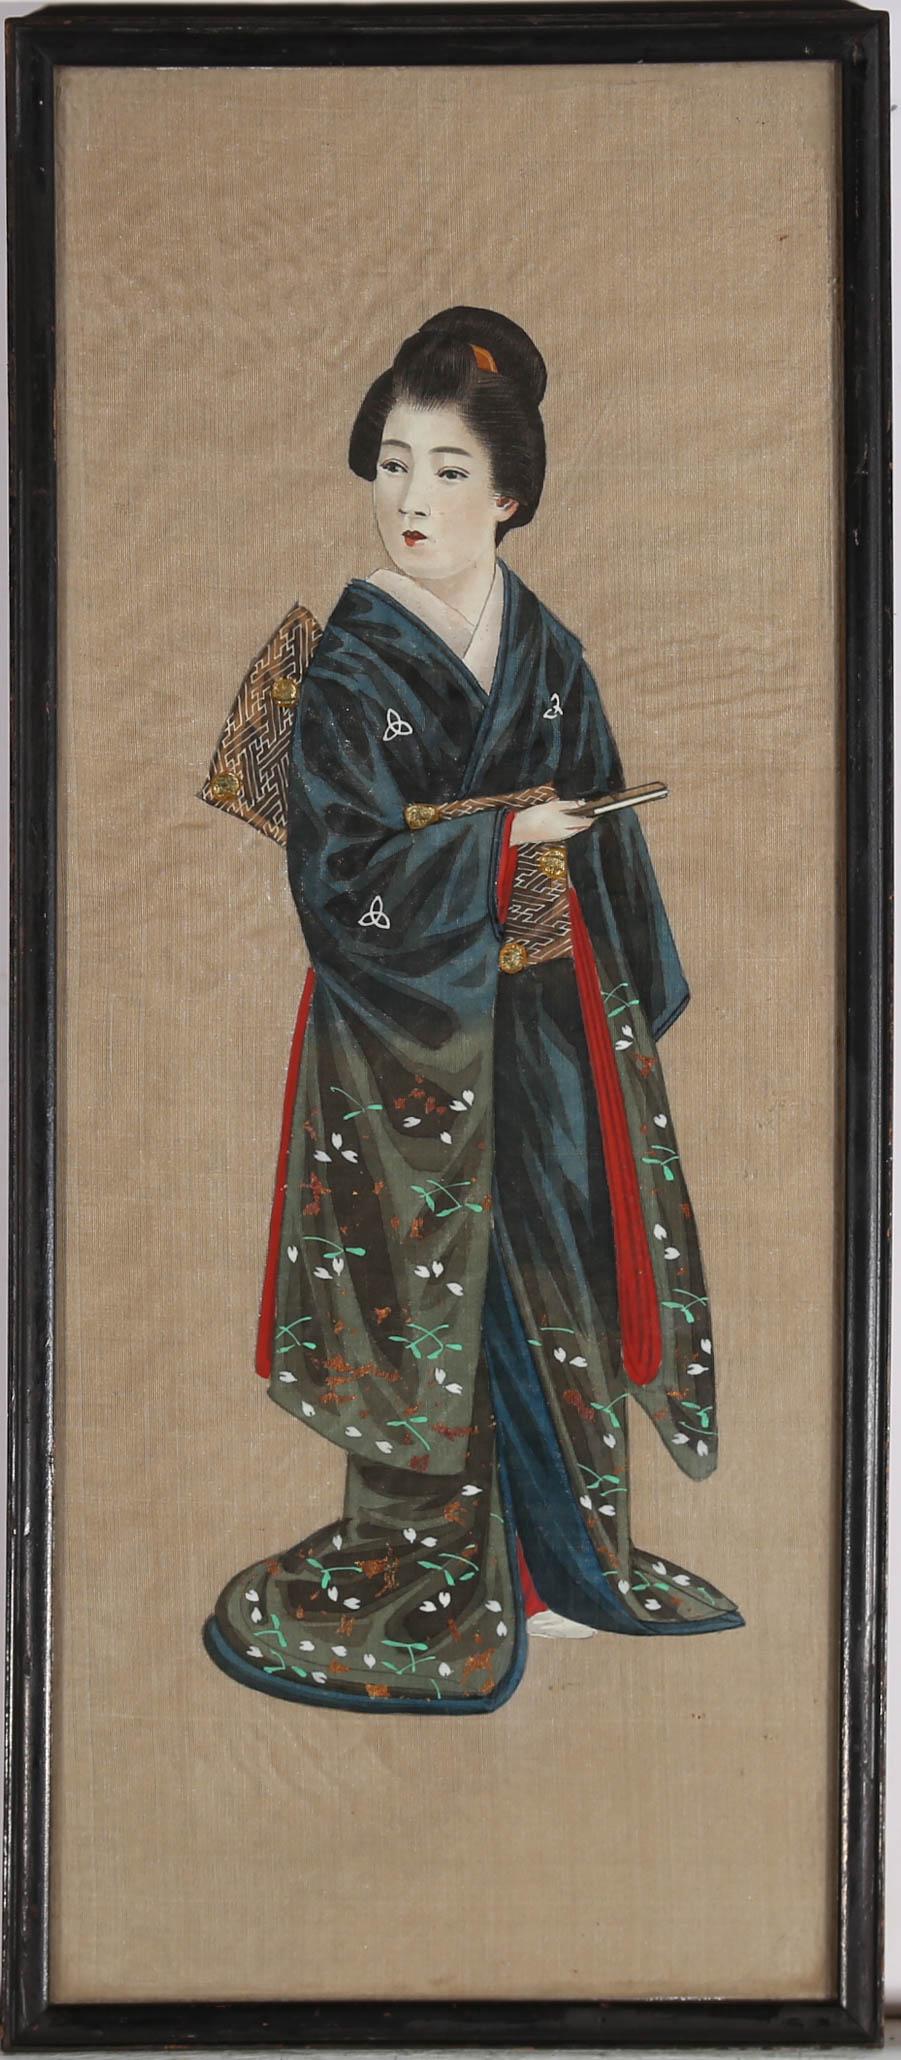 Unknown Portrait - Framed Early 20th Century Watercolour - Study of a Geisha